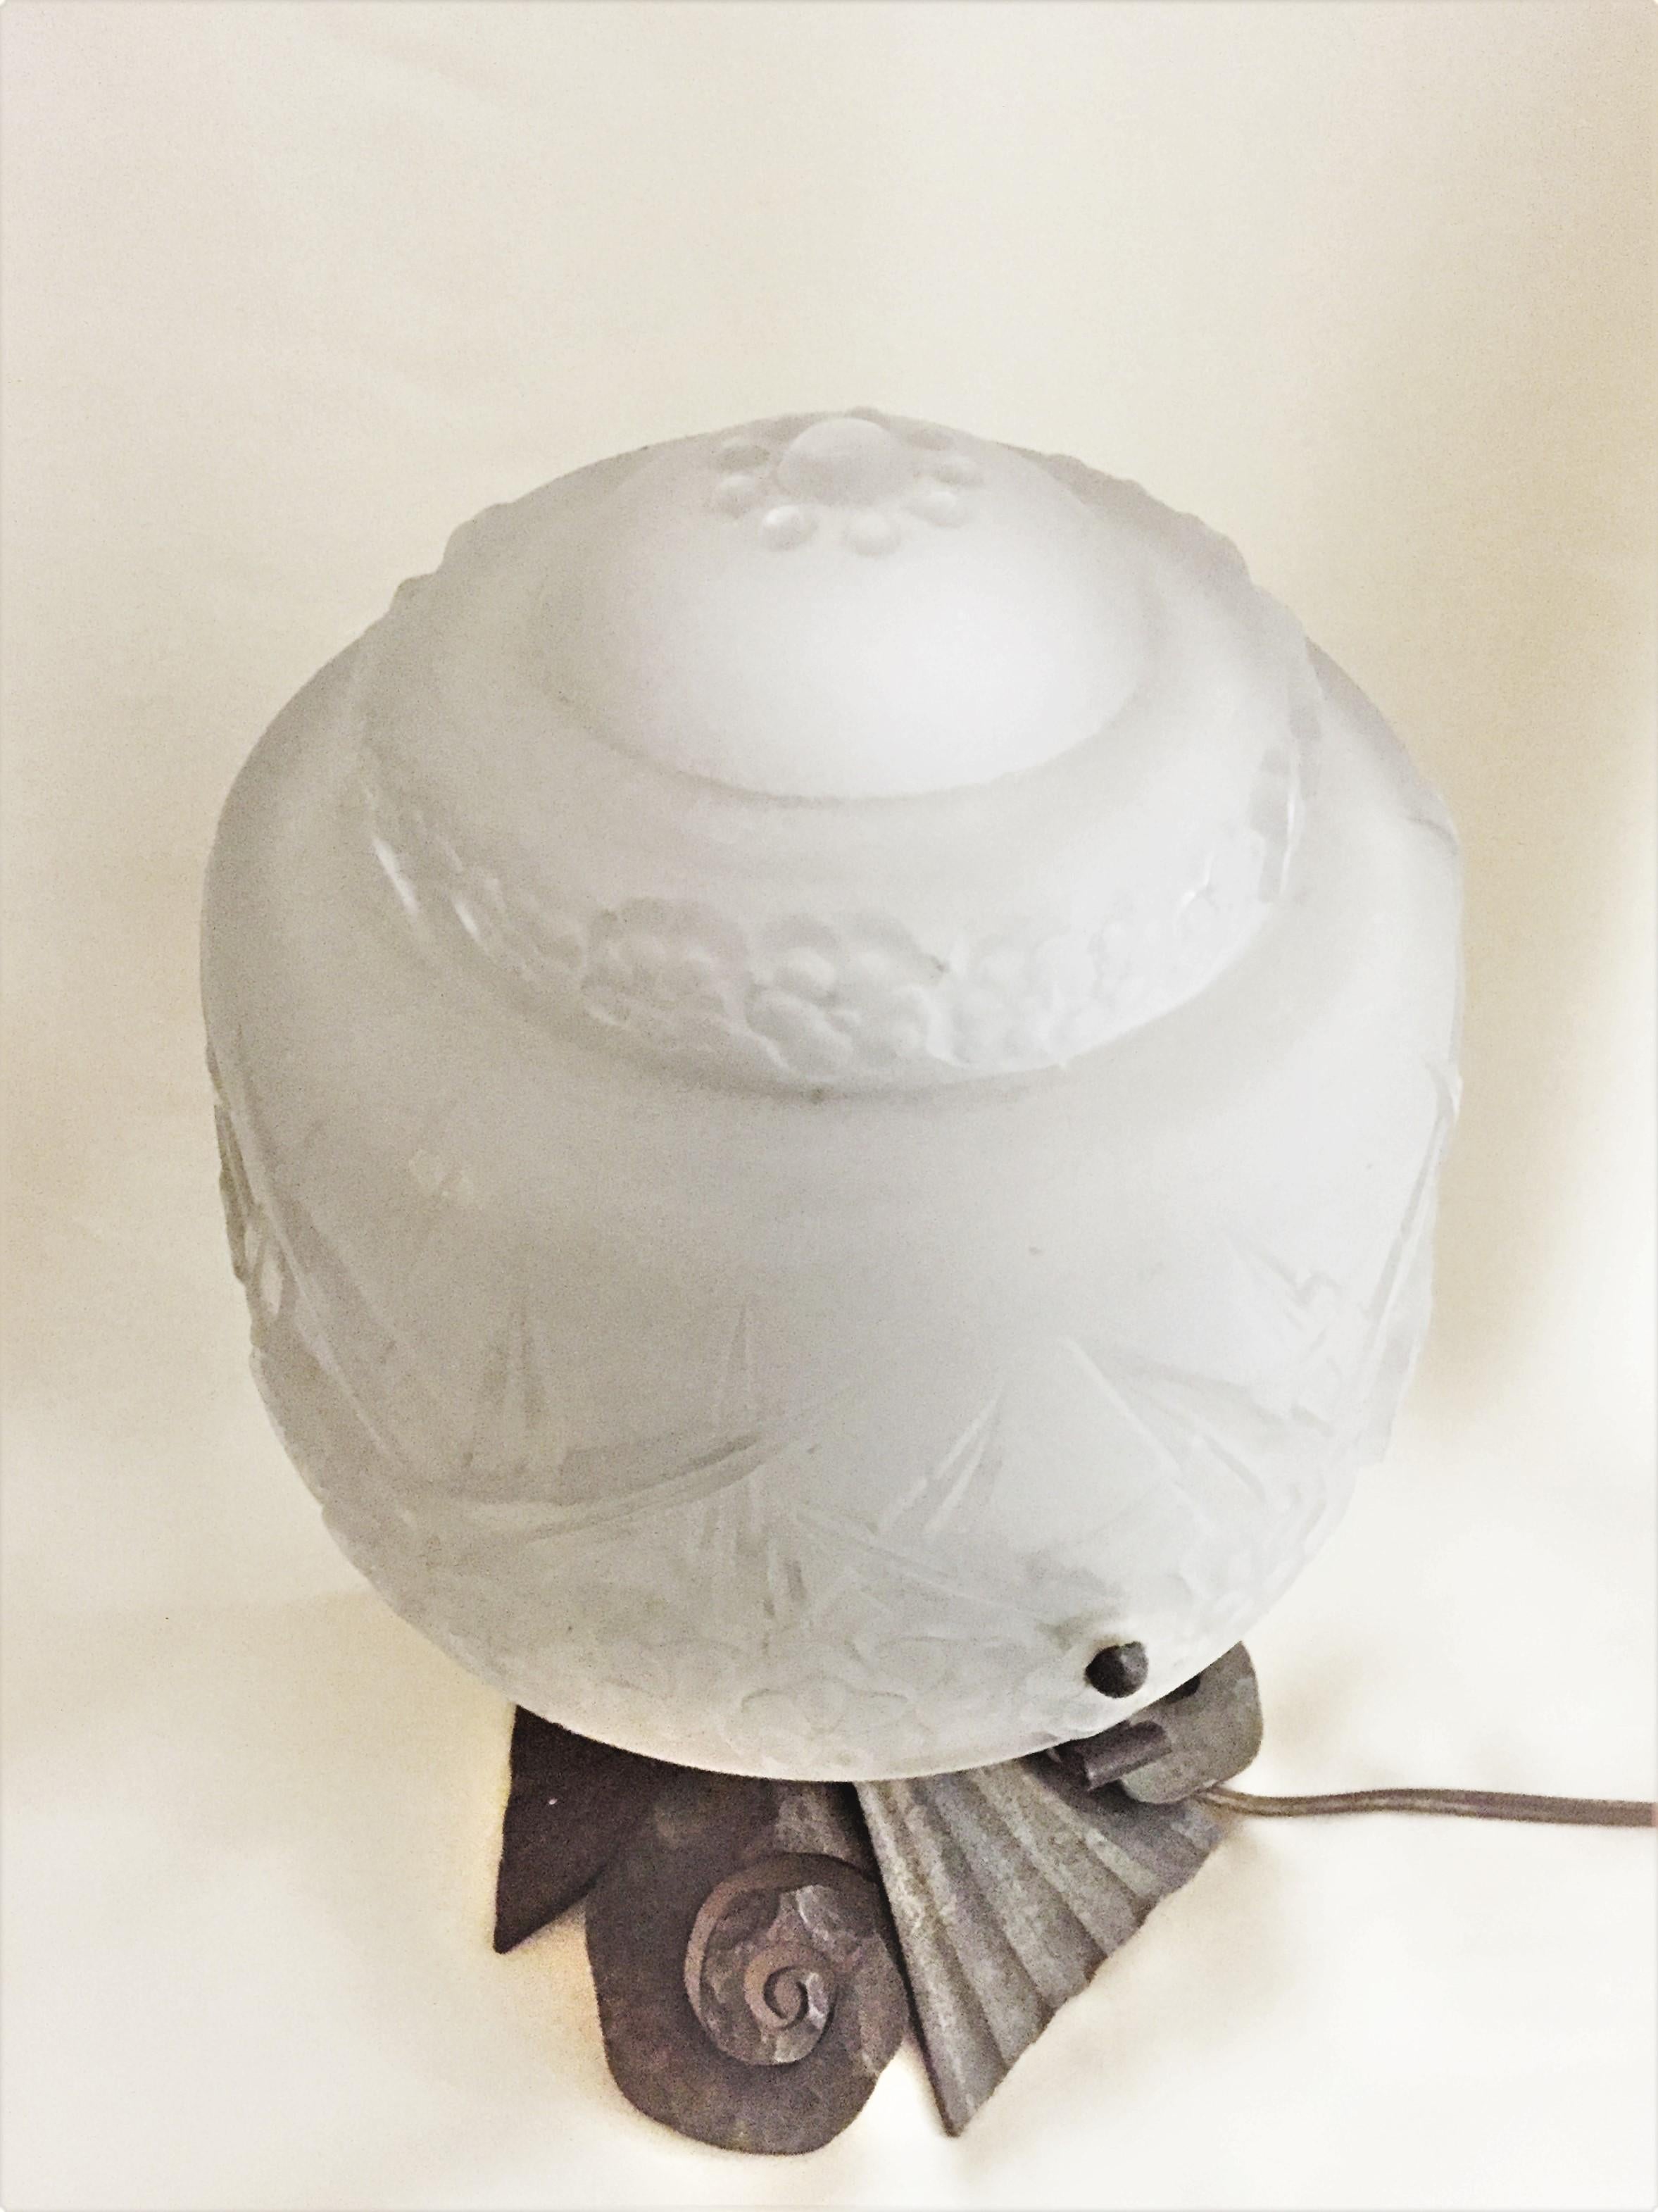 Dimensions:
Height (total): 11-3/4 inches
Height (glass lampshade only): 5-3/4 inches
Diameter (glass lampshade): 7 inches
Width (bronze base): 7-1/4 inches

Bronze stand, possibly, by Edgar William Brandt (1880–1960), who was a French iron worker,